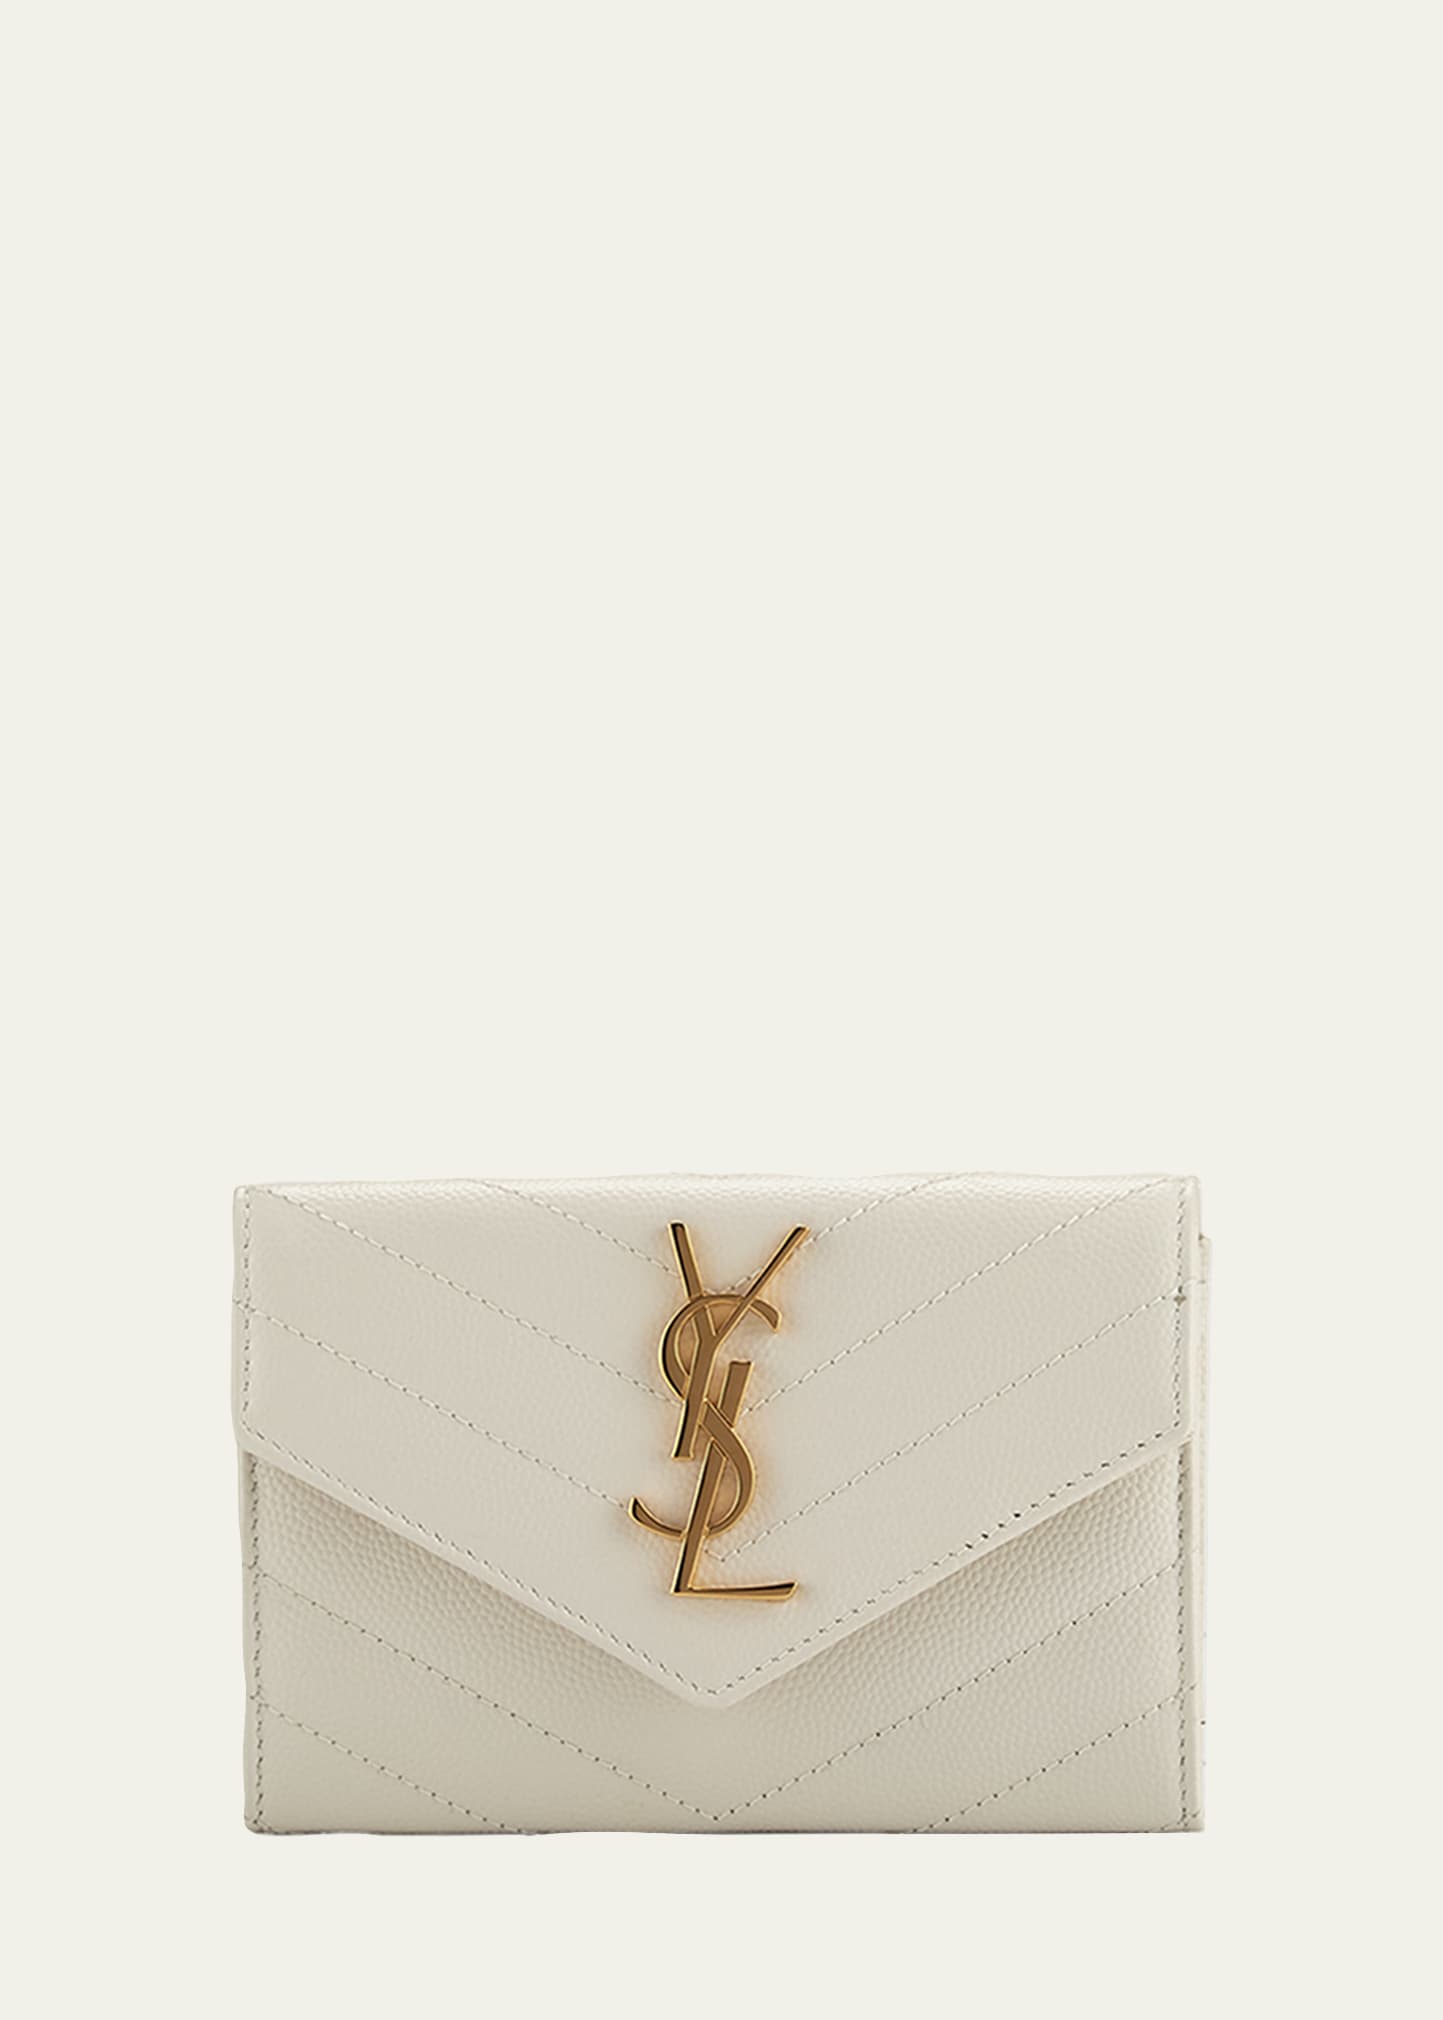 Saint Laurent Ysl Monogram Small Flap Wallet In Grained Leather In White